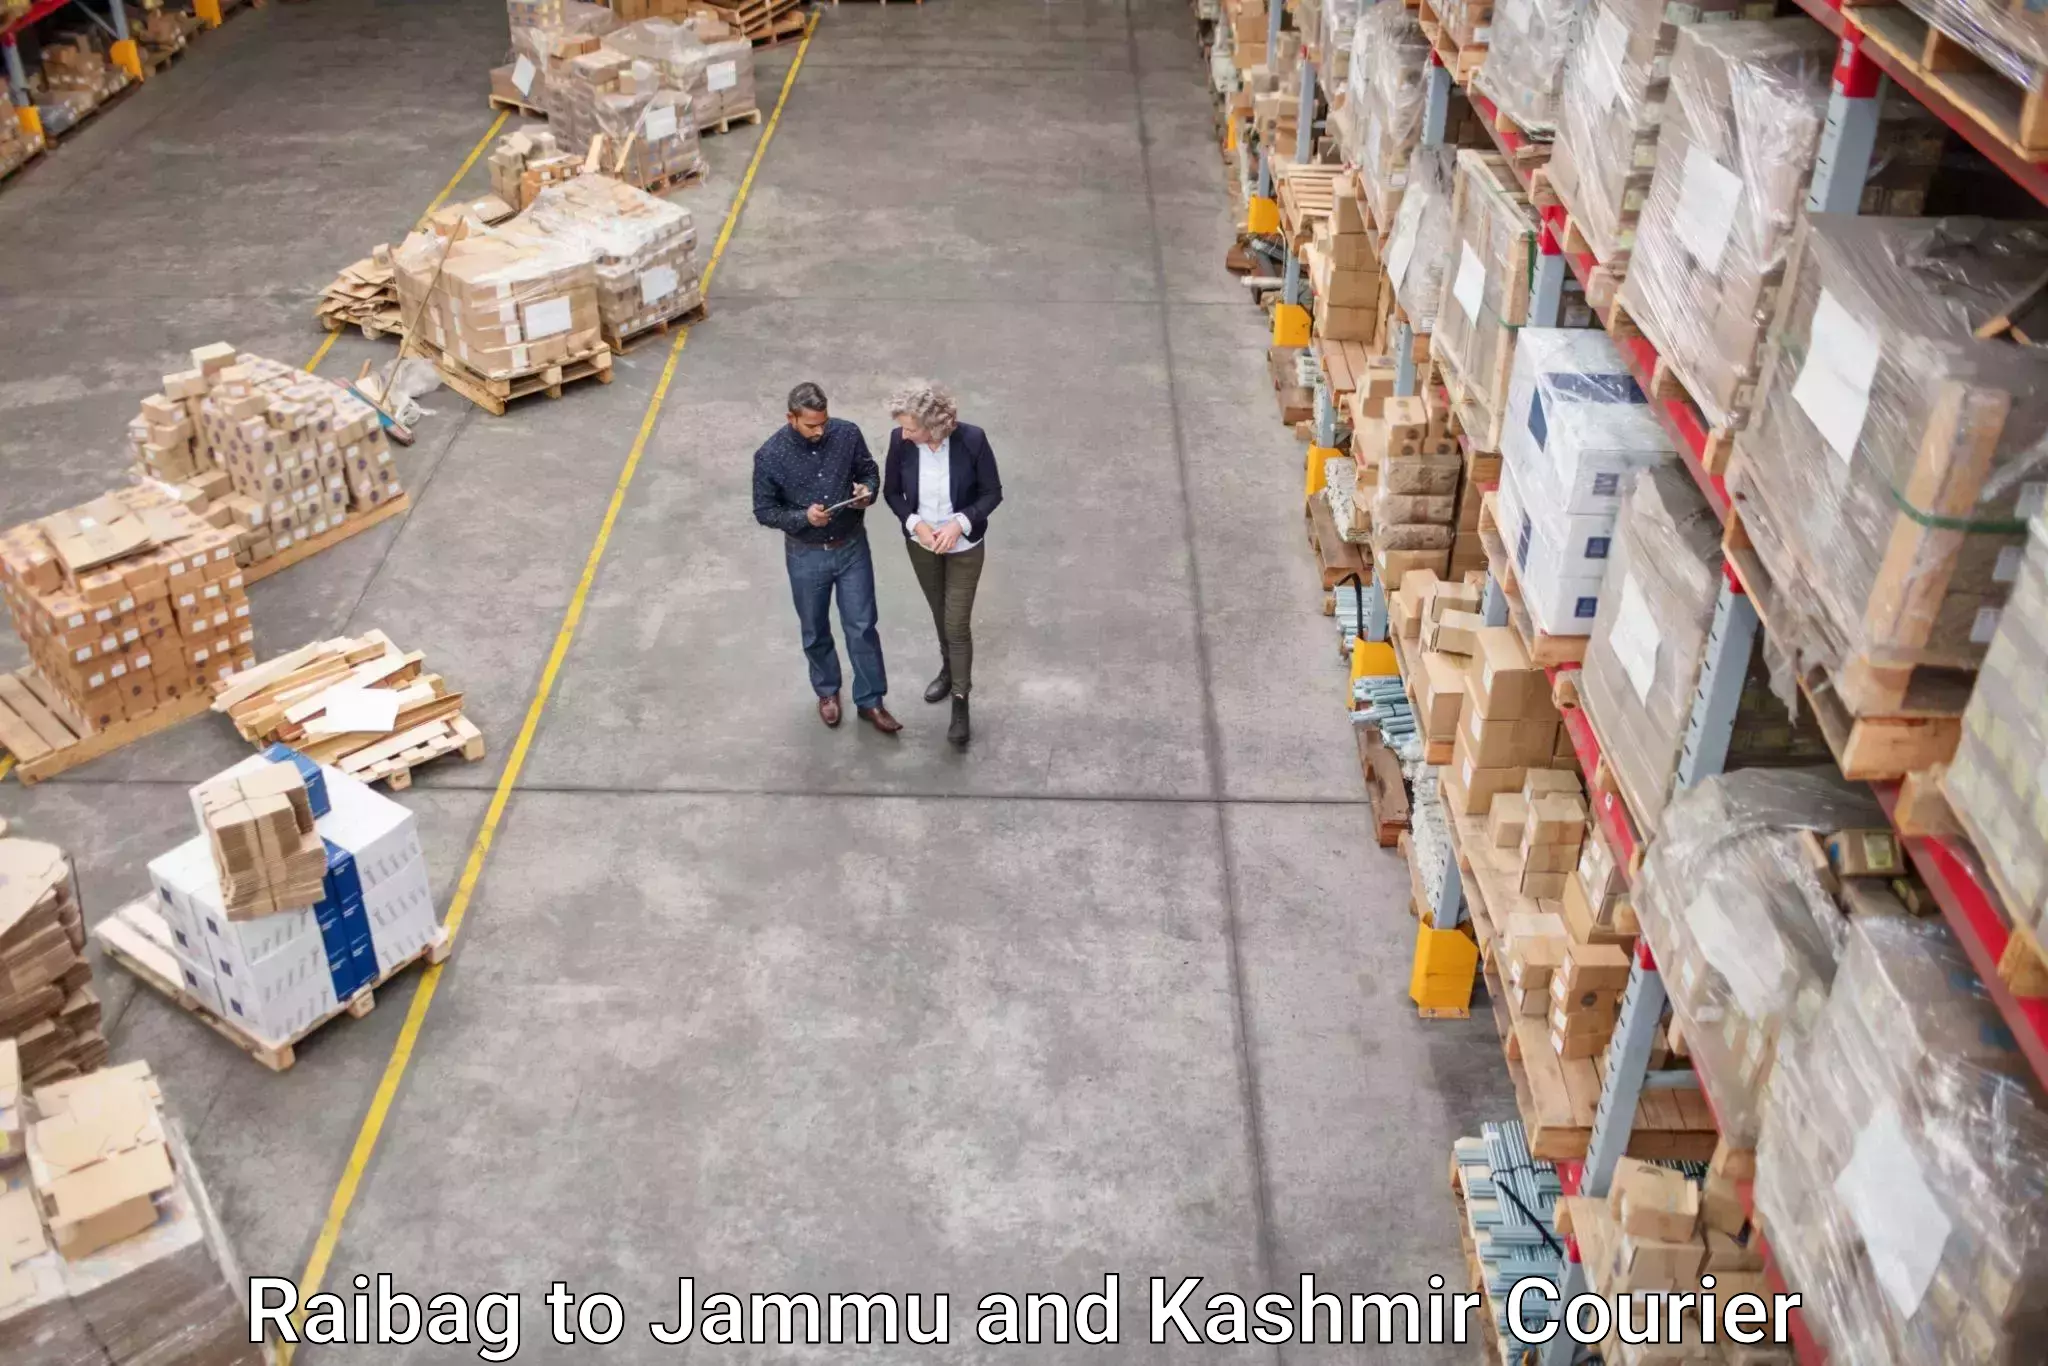 Advanced tracking systems in Raibag to Jammu and Kashmir